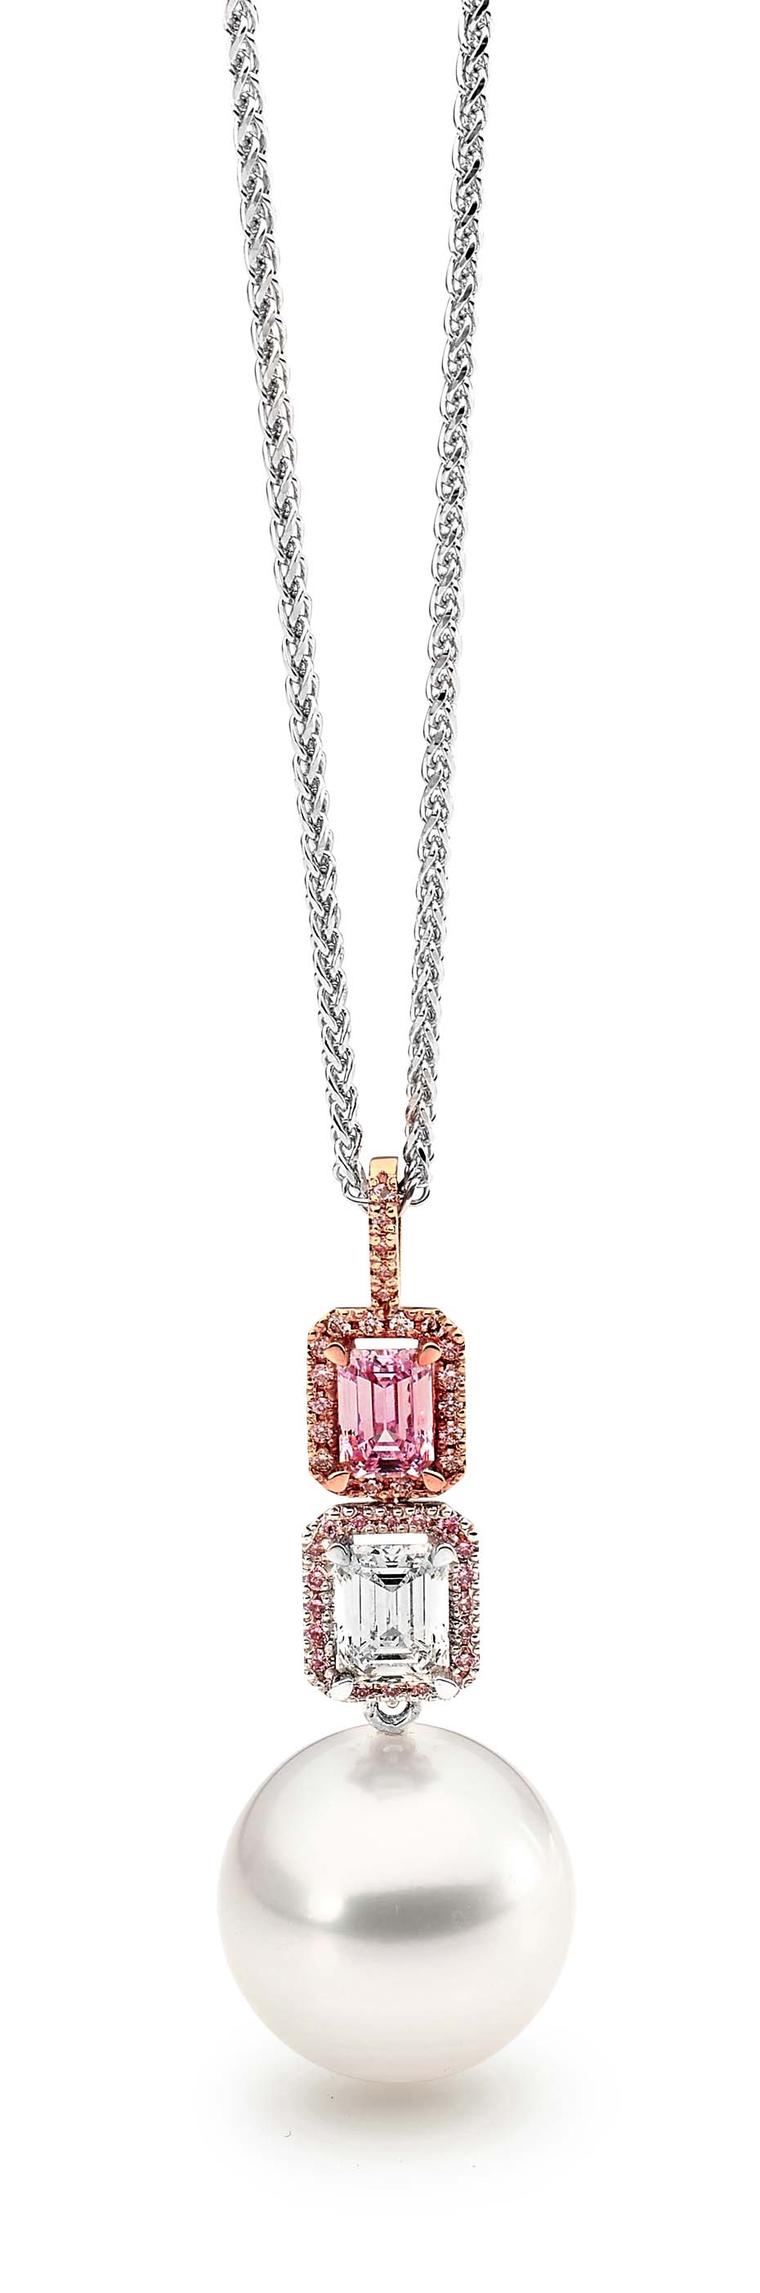 Linneys pendant necklace in white and rose gold with an Australian South Sea pearl, a pink diamond and a white diamond.